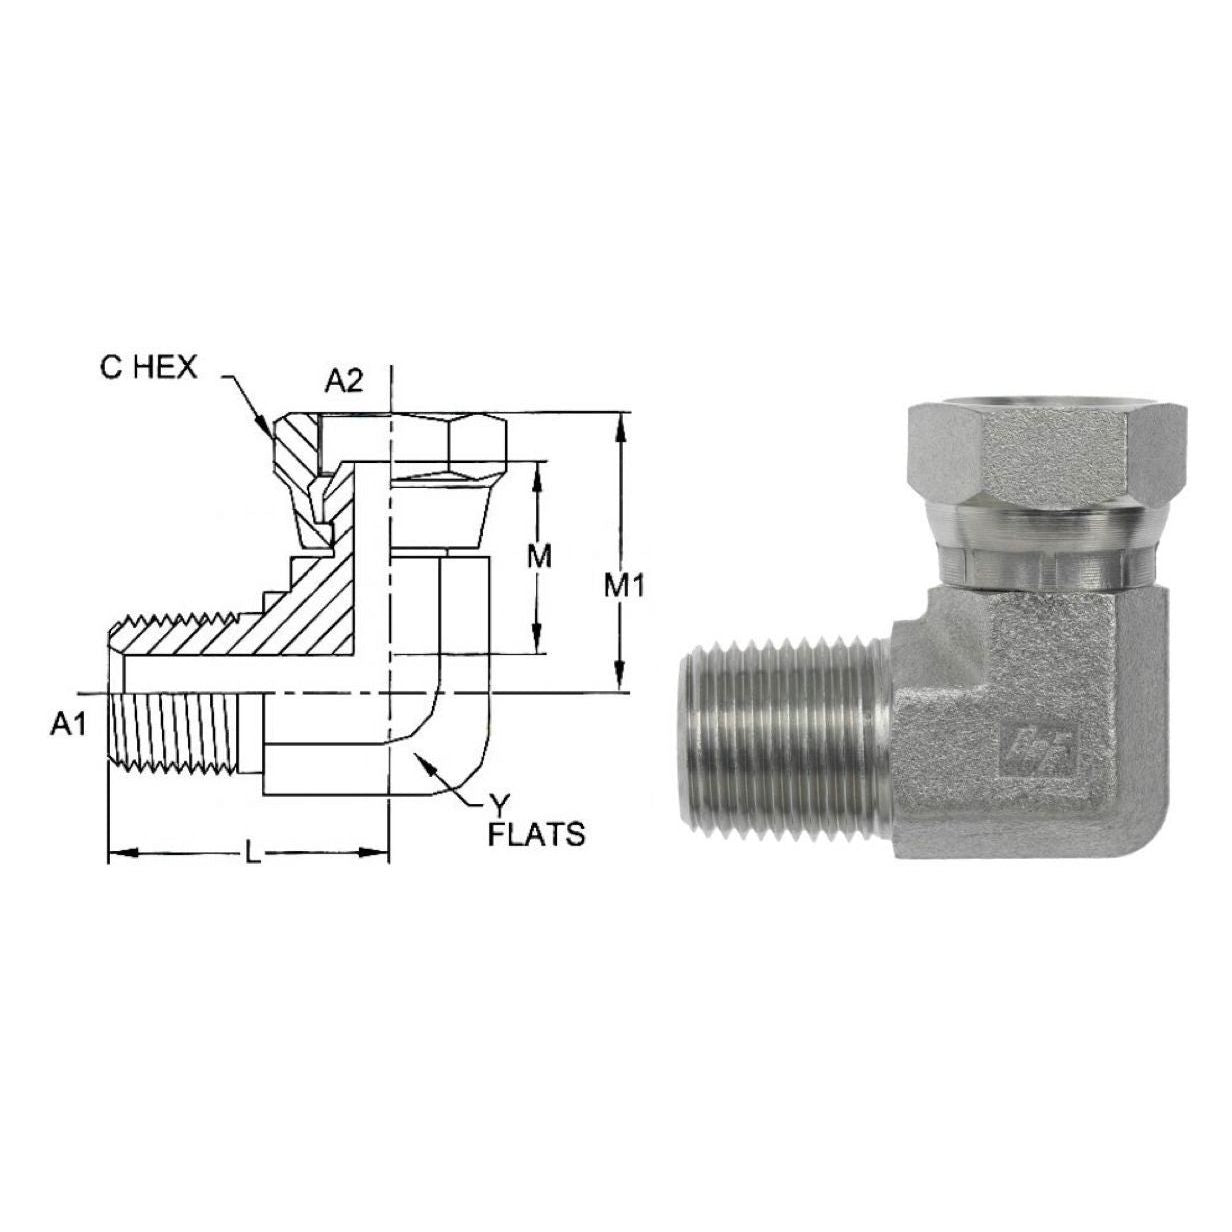 1501-20-20-SS : OneHydraulics 90-Degree Elbow, 1.25 (1-1/4) Male NPT x 1.25 (1-1/4) Female NPT Swivel, Stainless Steel, 1900psi